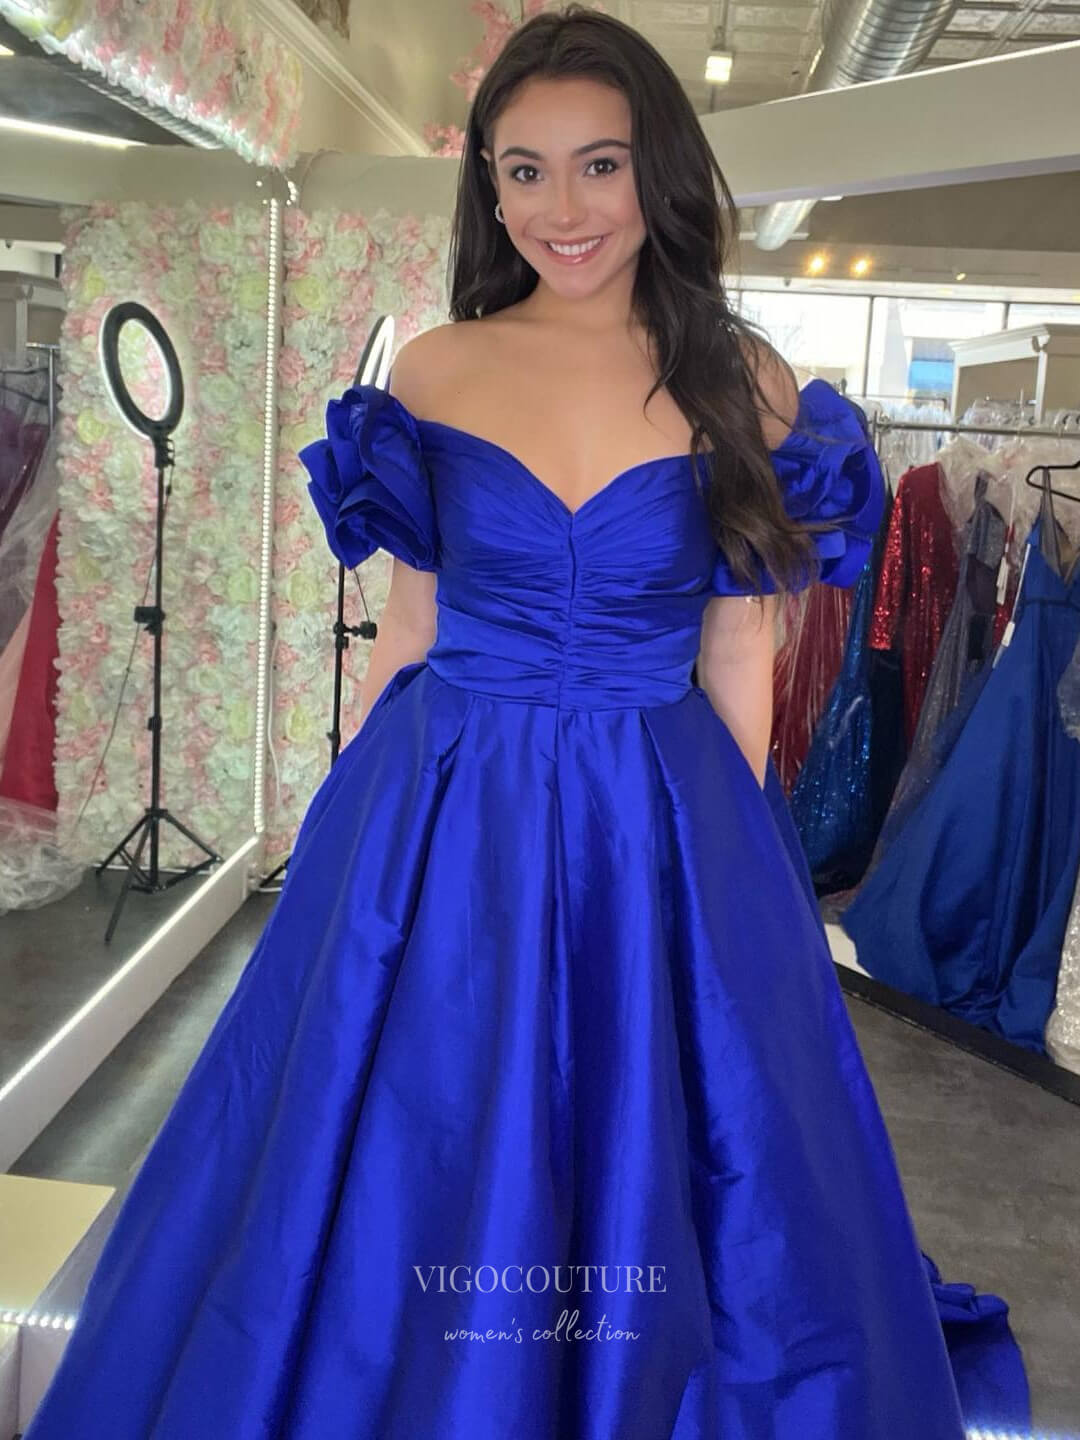 Puffed Sleeve Cheap Prom Dresses Satin Pleated Bodice Formal Gown 24154-Prom Dresses-vigocouture-Blue-Custom Size-vigocouture